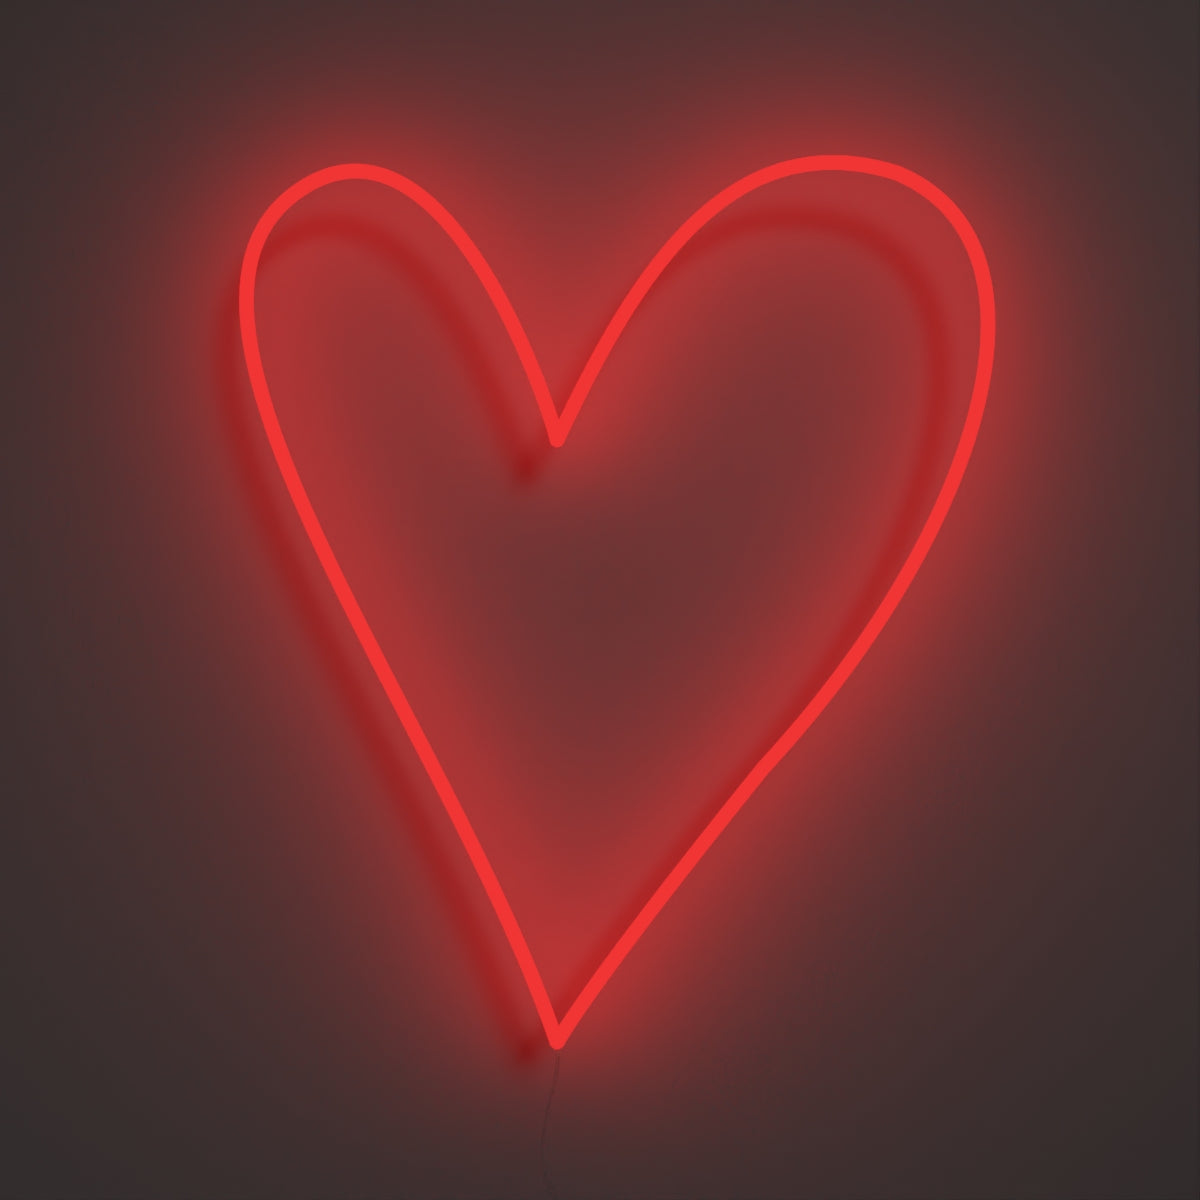 Three Hearts Light Up Wall Art Adorable Neon Heart Sign for Sale